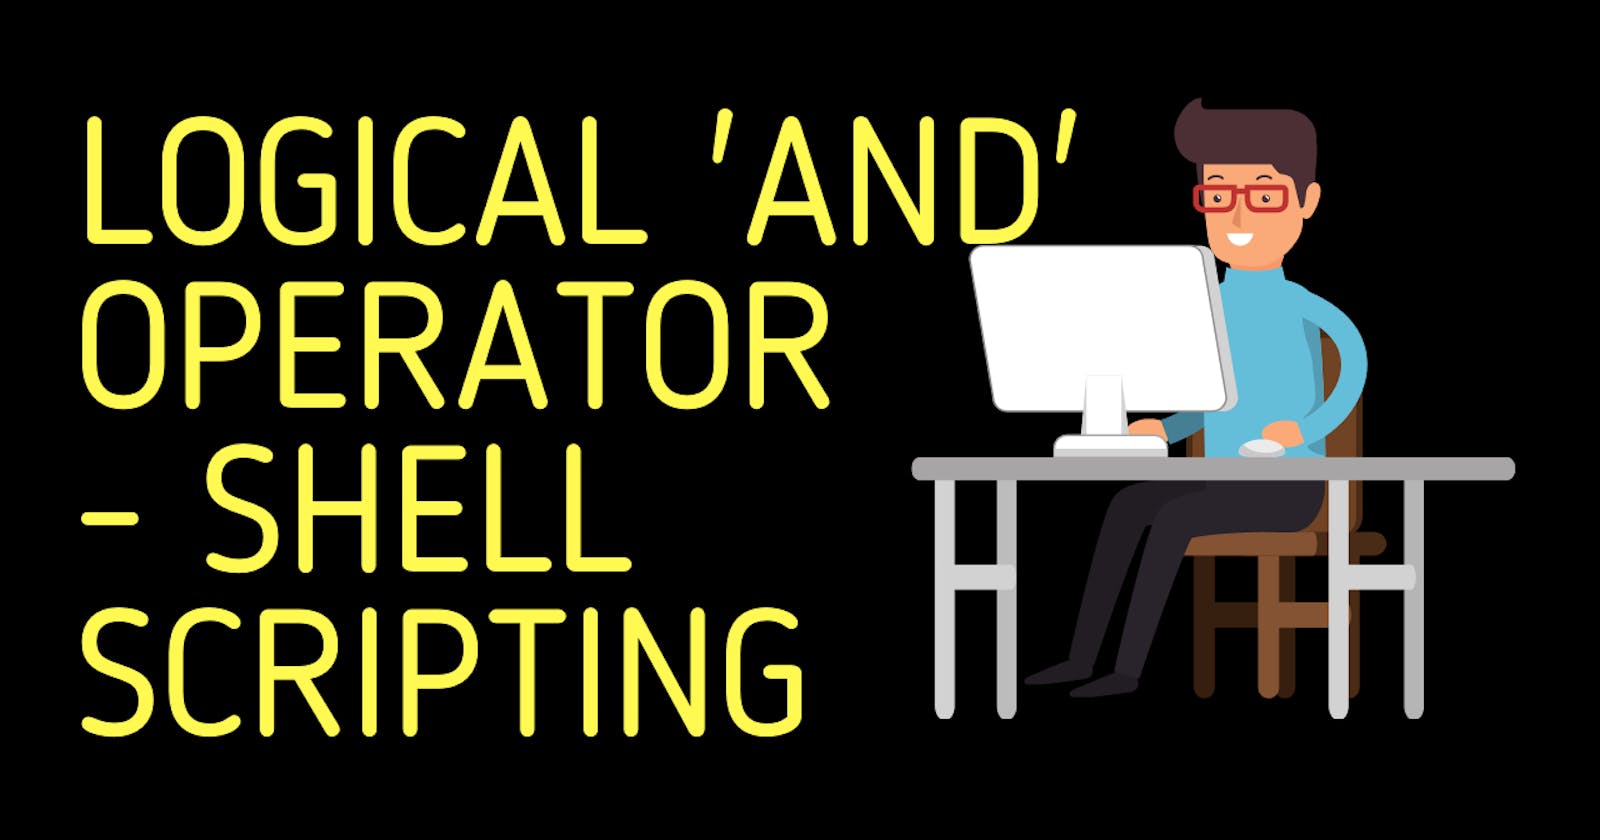 Logical 'AND' Operator | Shell Scripting